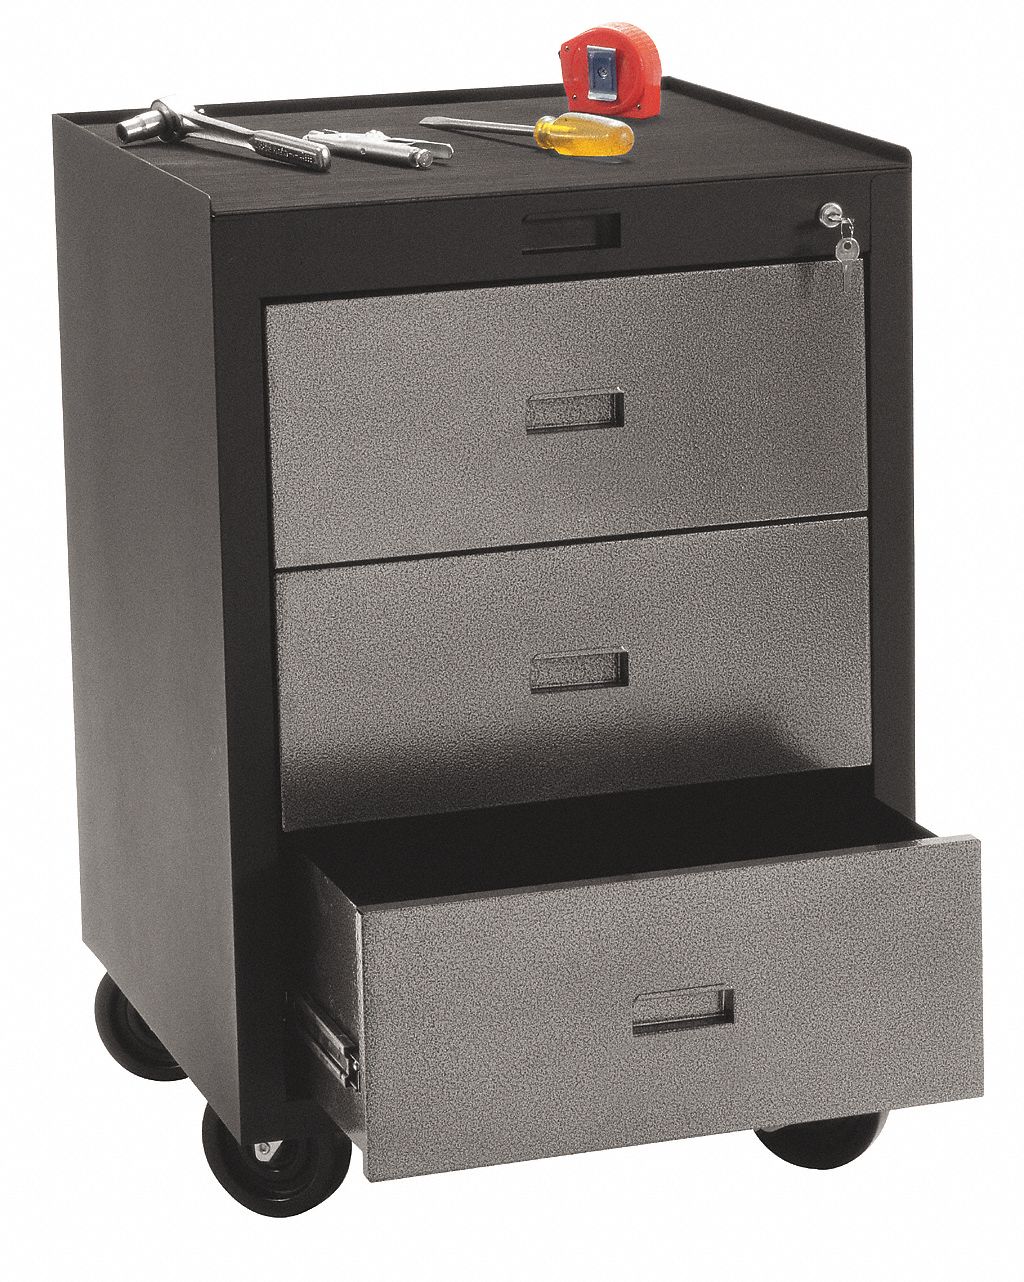 3JHY4 - Storage Cabinet Black/Silver 78 in H